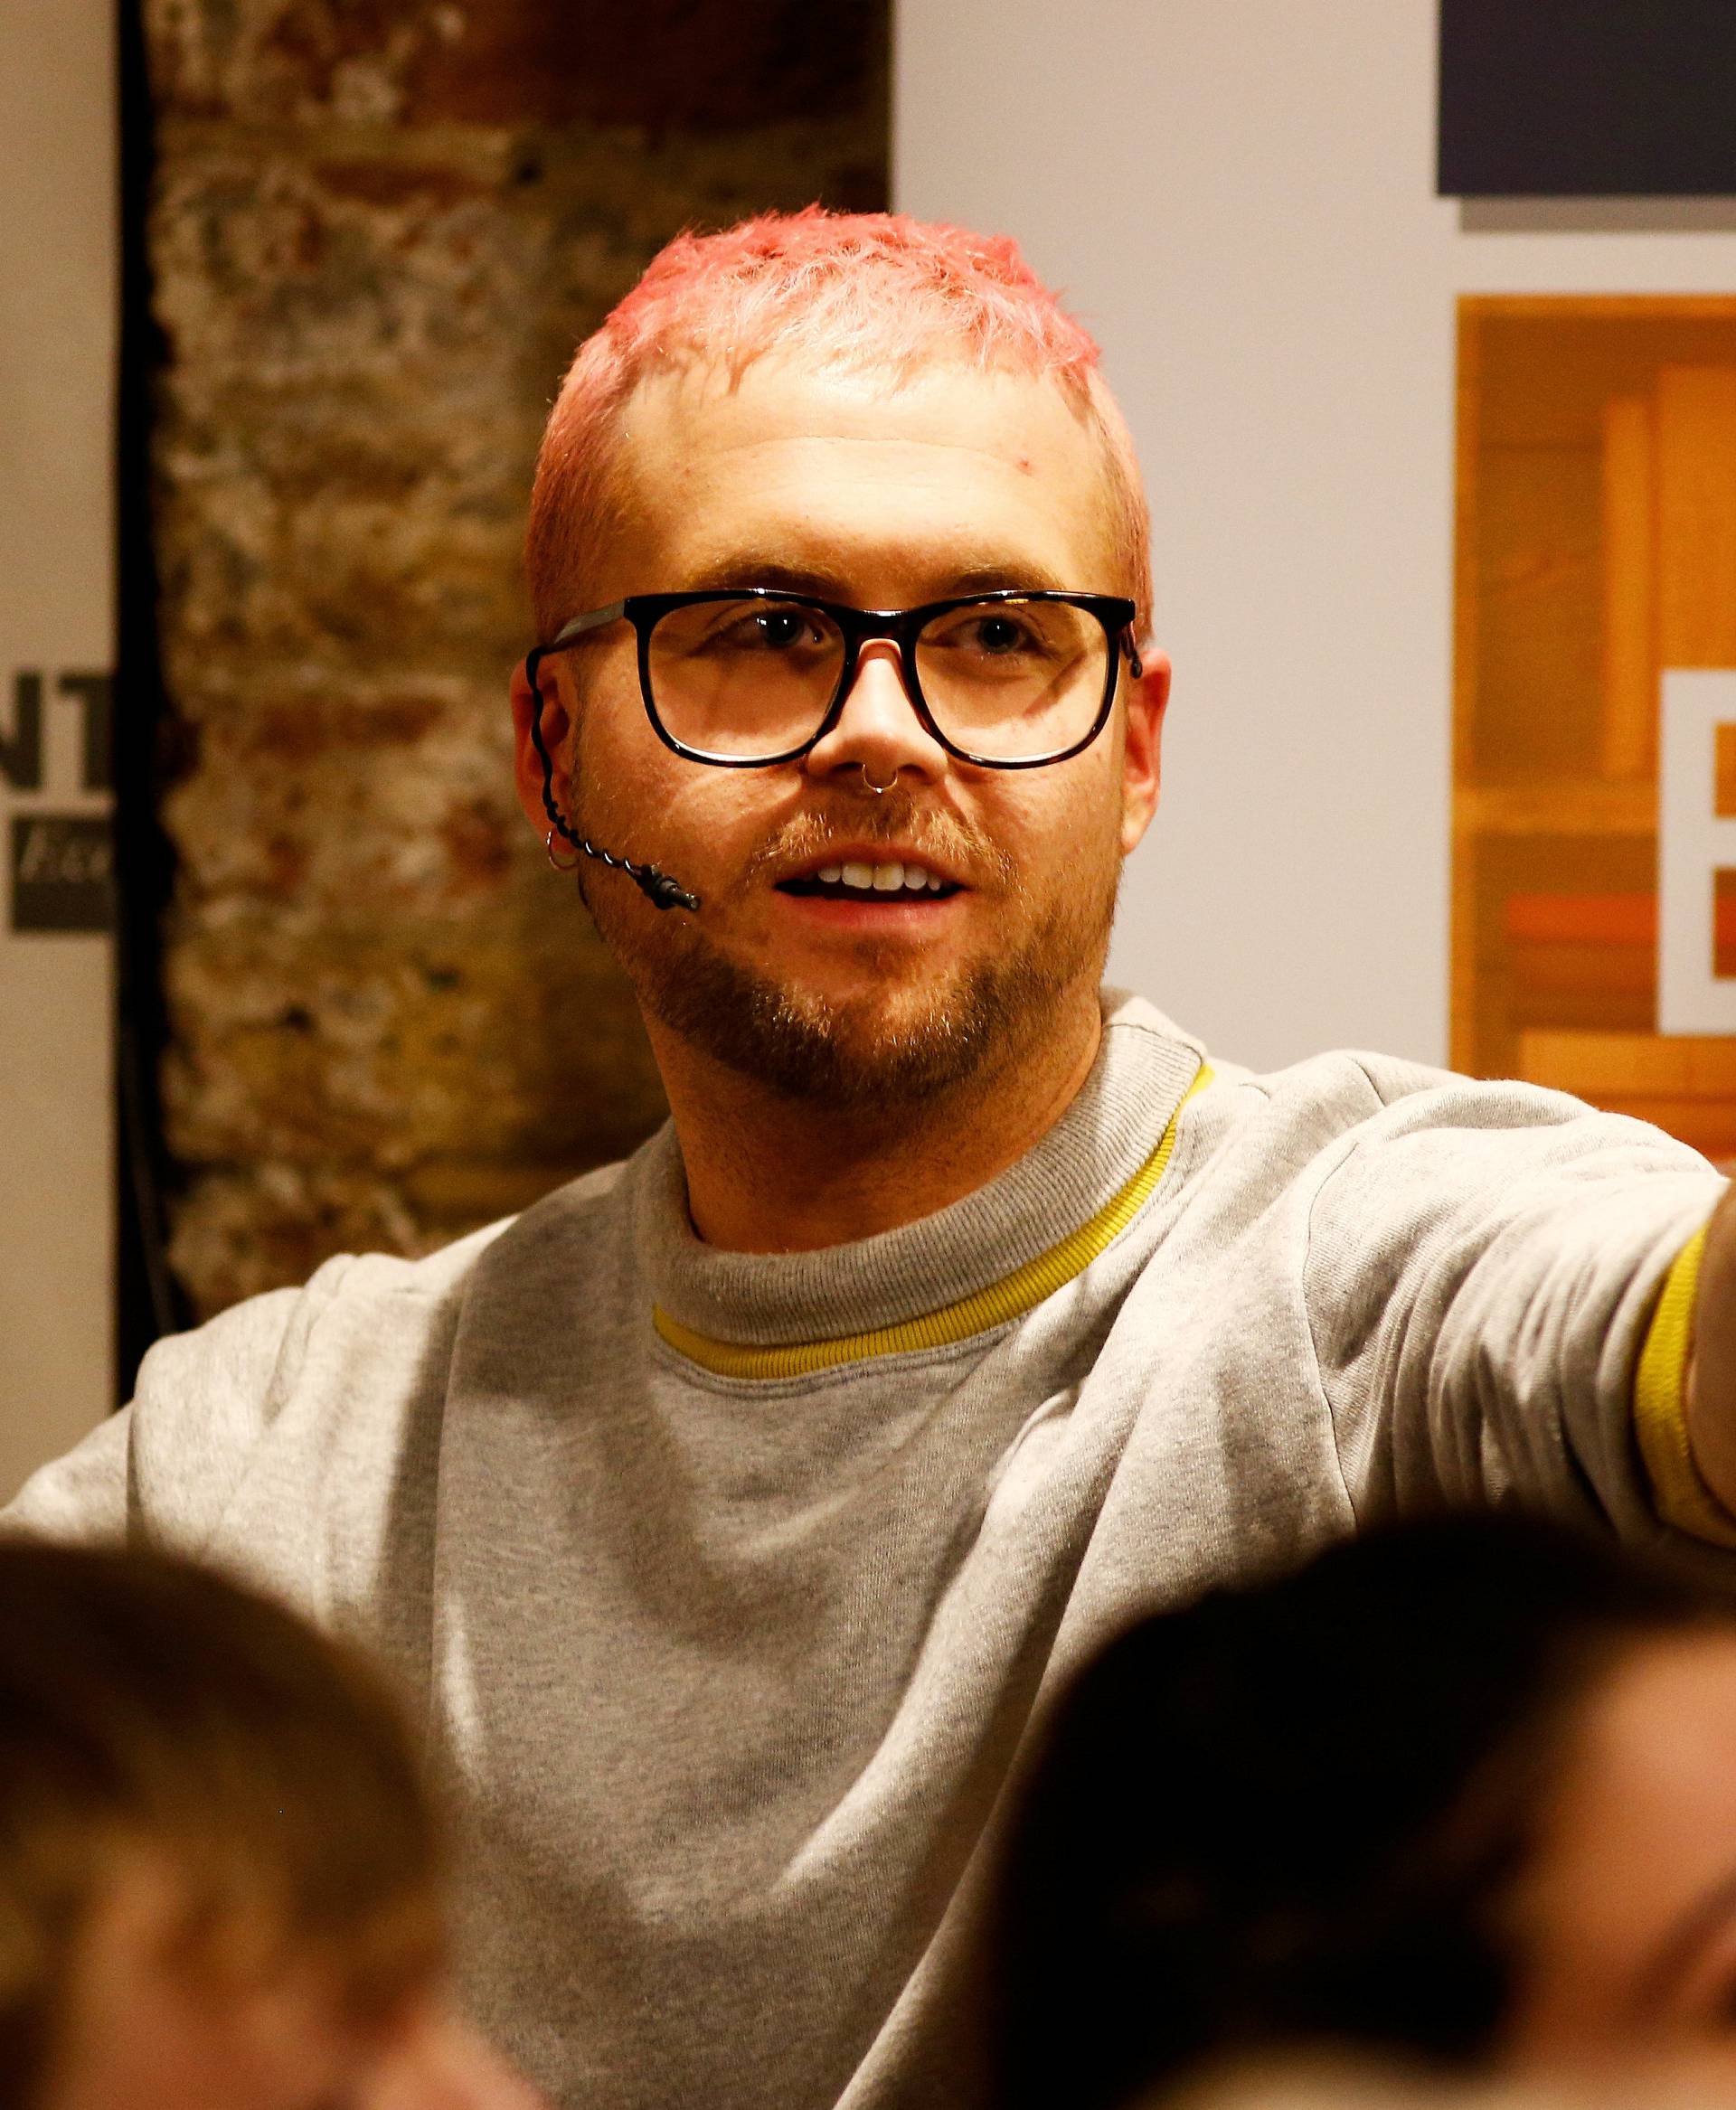 Christopher Wylie, a whistleblower who formerly worked with Cambridge Analytica, speaks at the Frontline Club in London